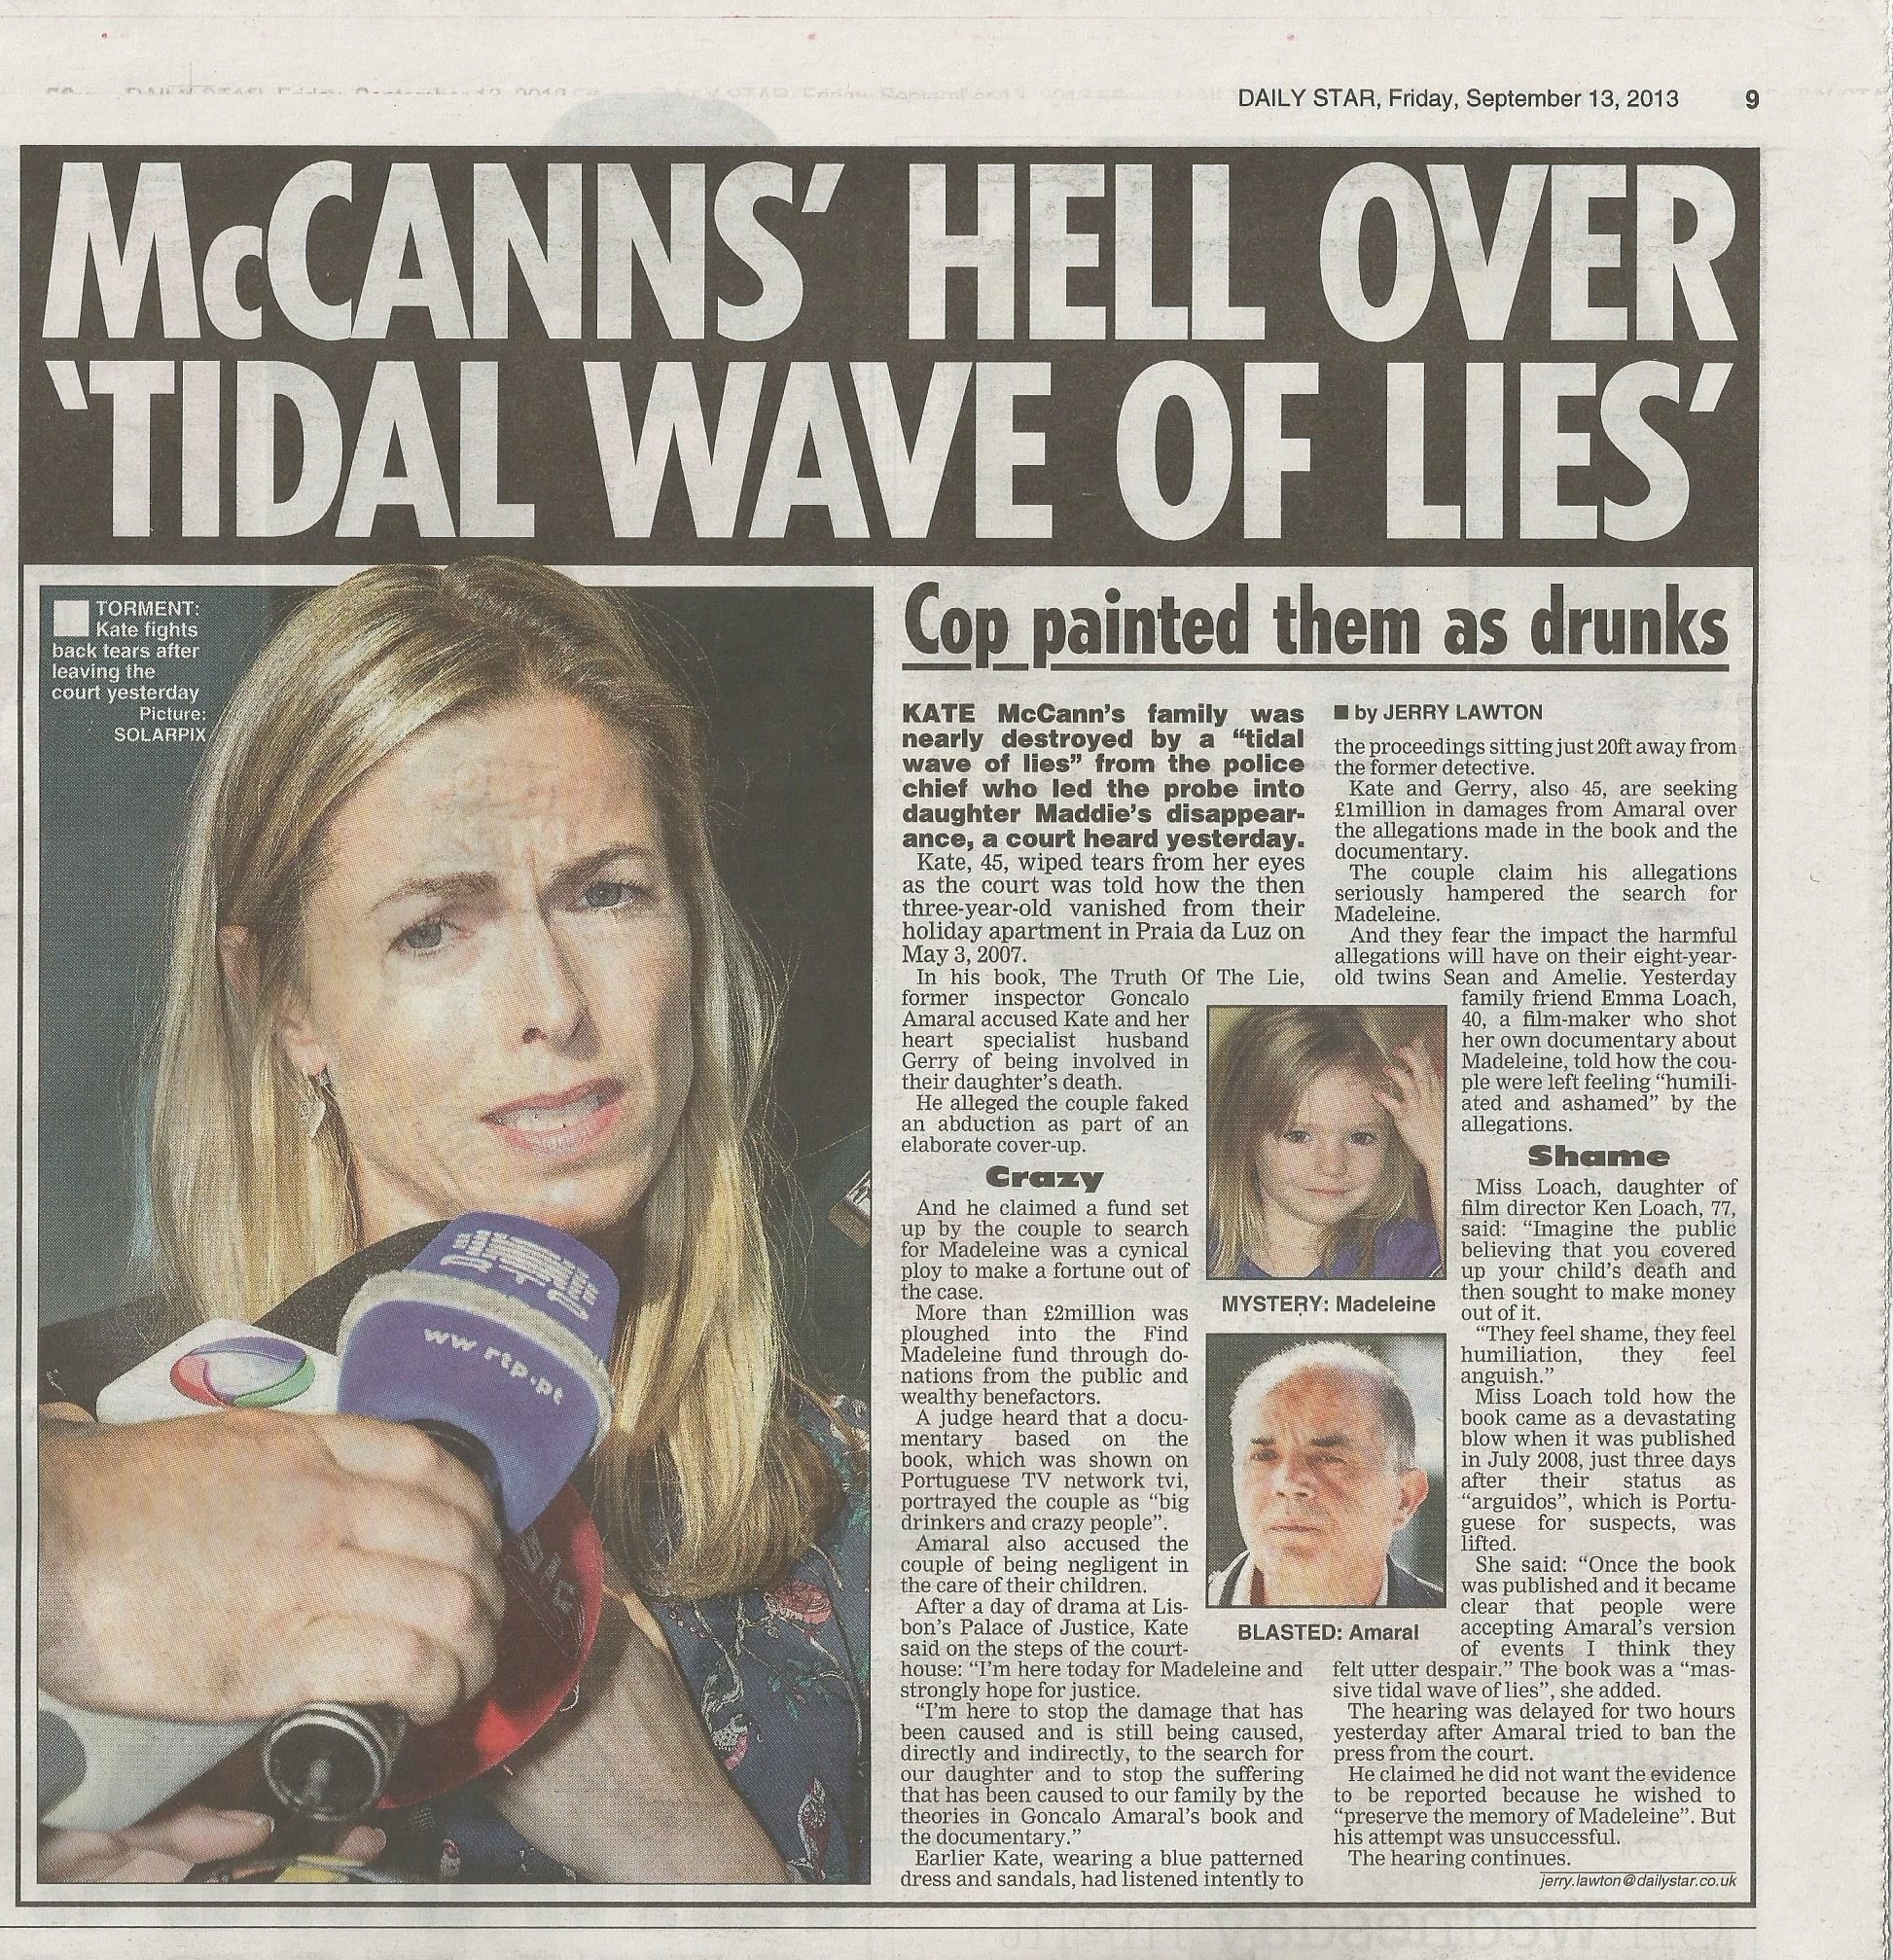 Daily Star, paper edition: 'McCanns' hell over 'tidal wave of lies' - Cop painted them as drunks', 13 September 2013